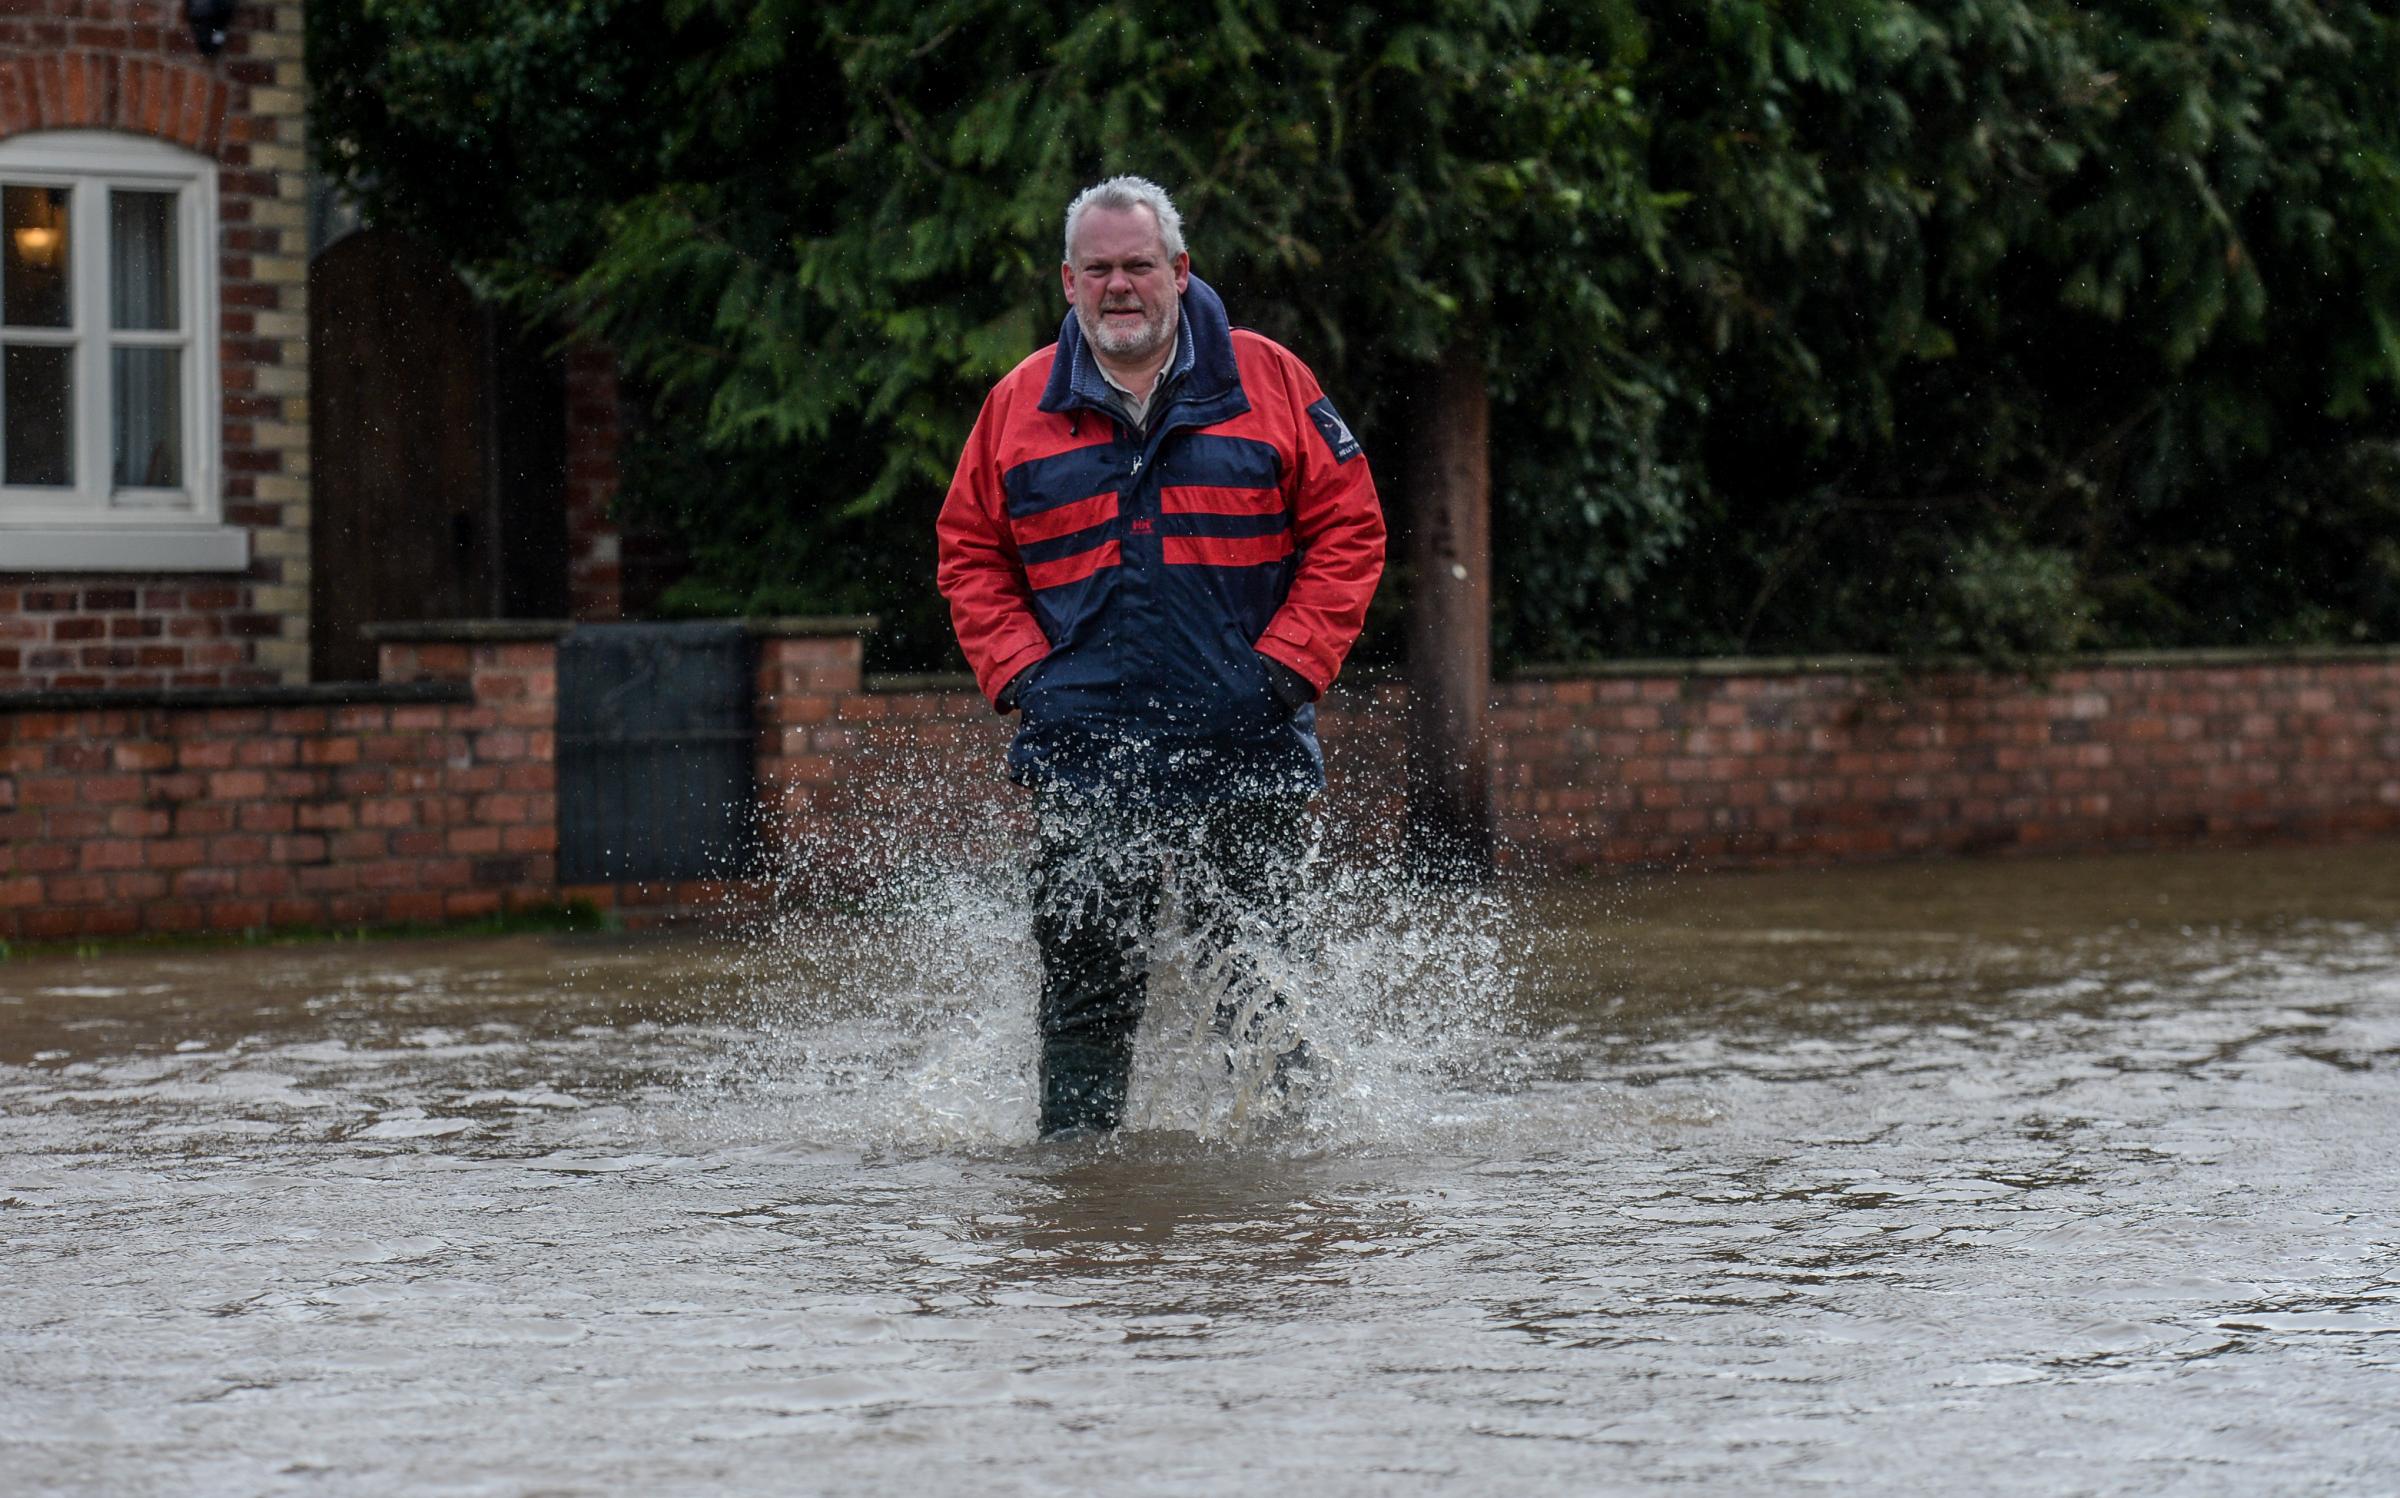 Pictured is Reg Curtis wading through the water as it starts to recede.